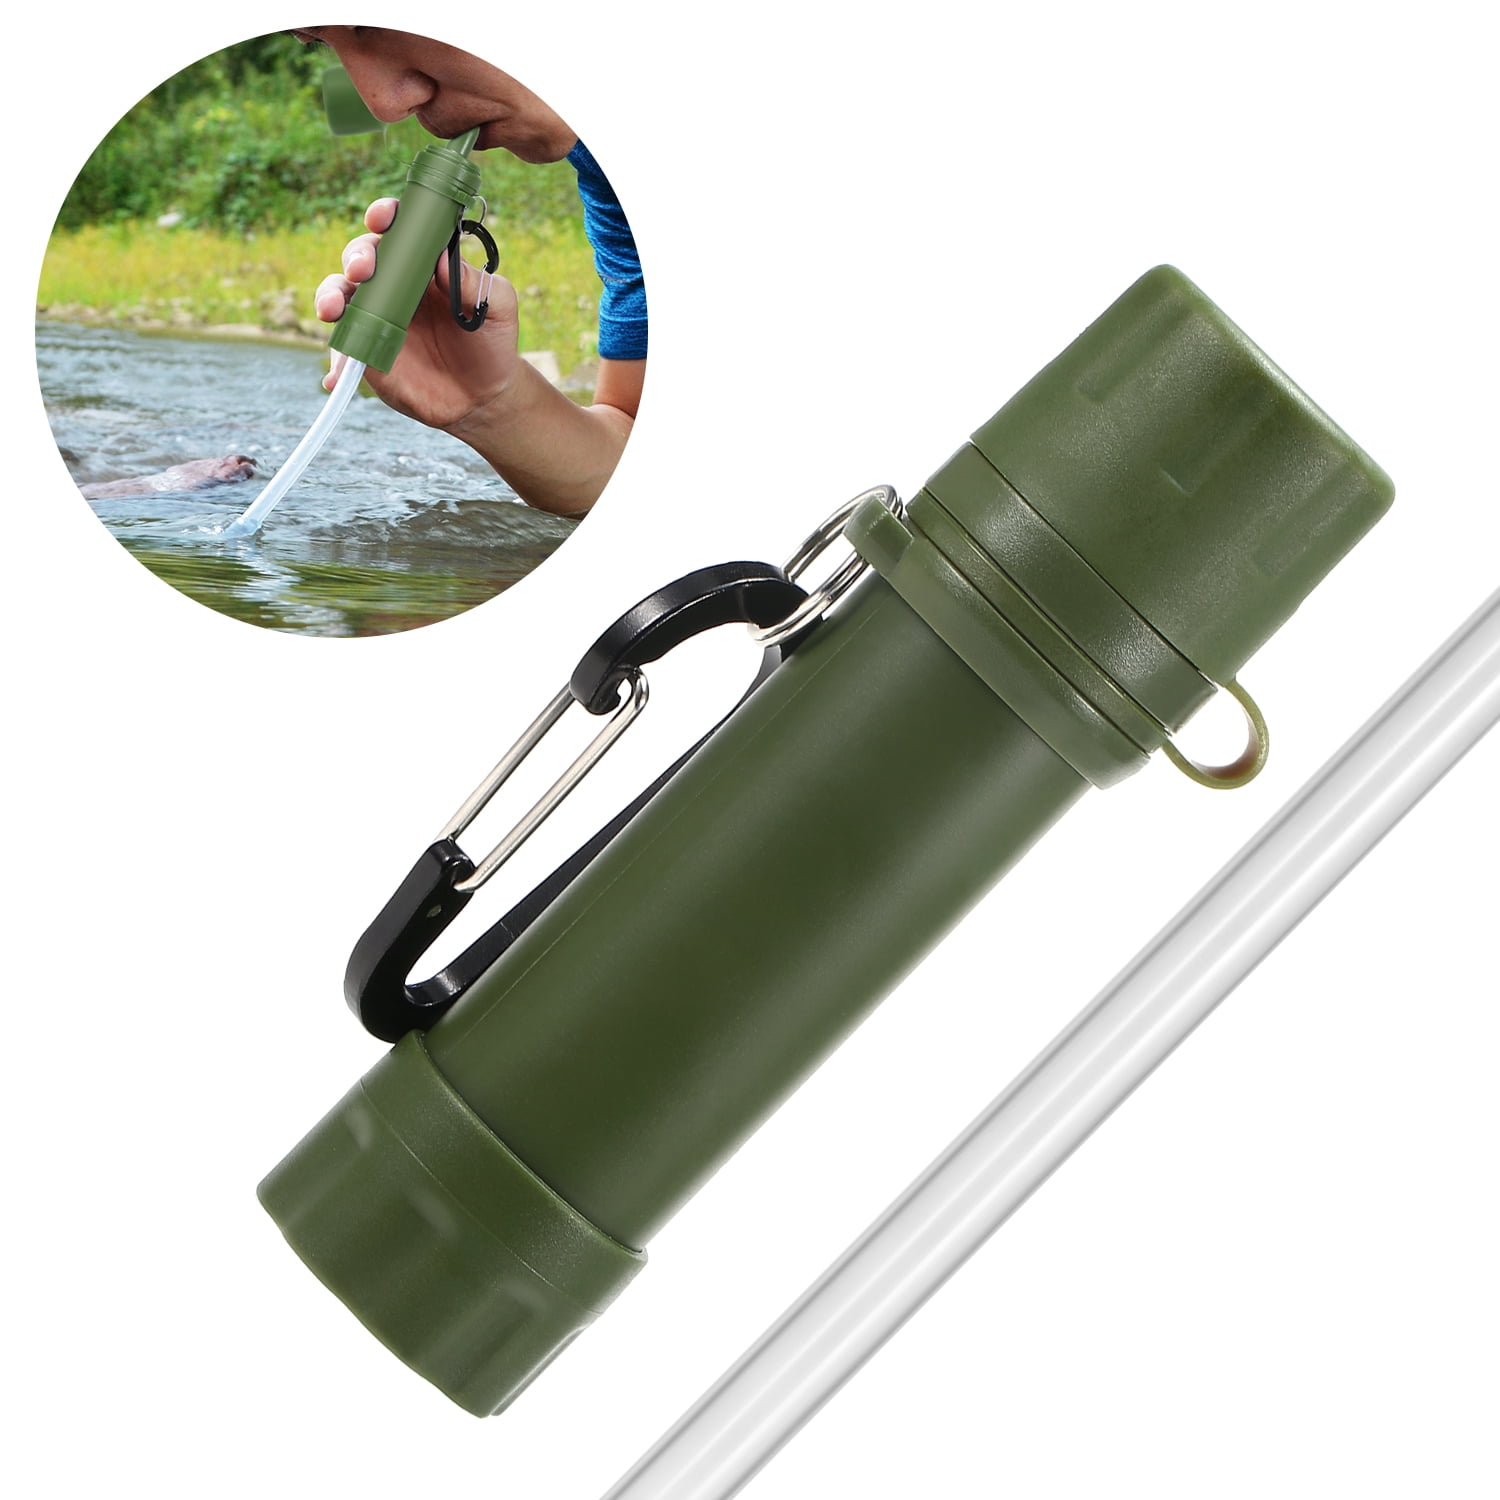 Details about   3 Pack Personal Survival Water Filter Straw Filtration Camping Hiking Emergency 